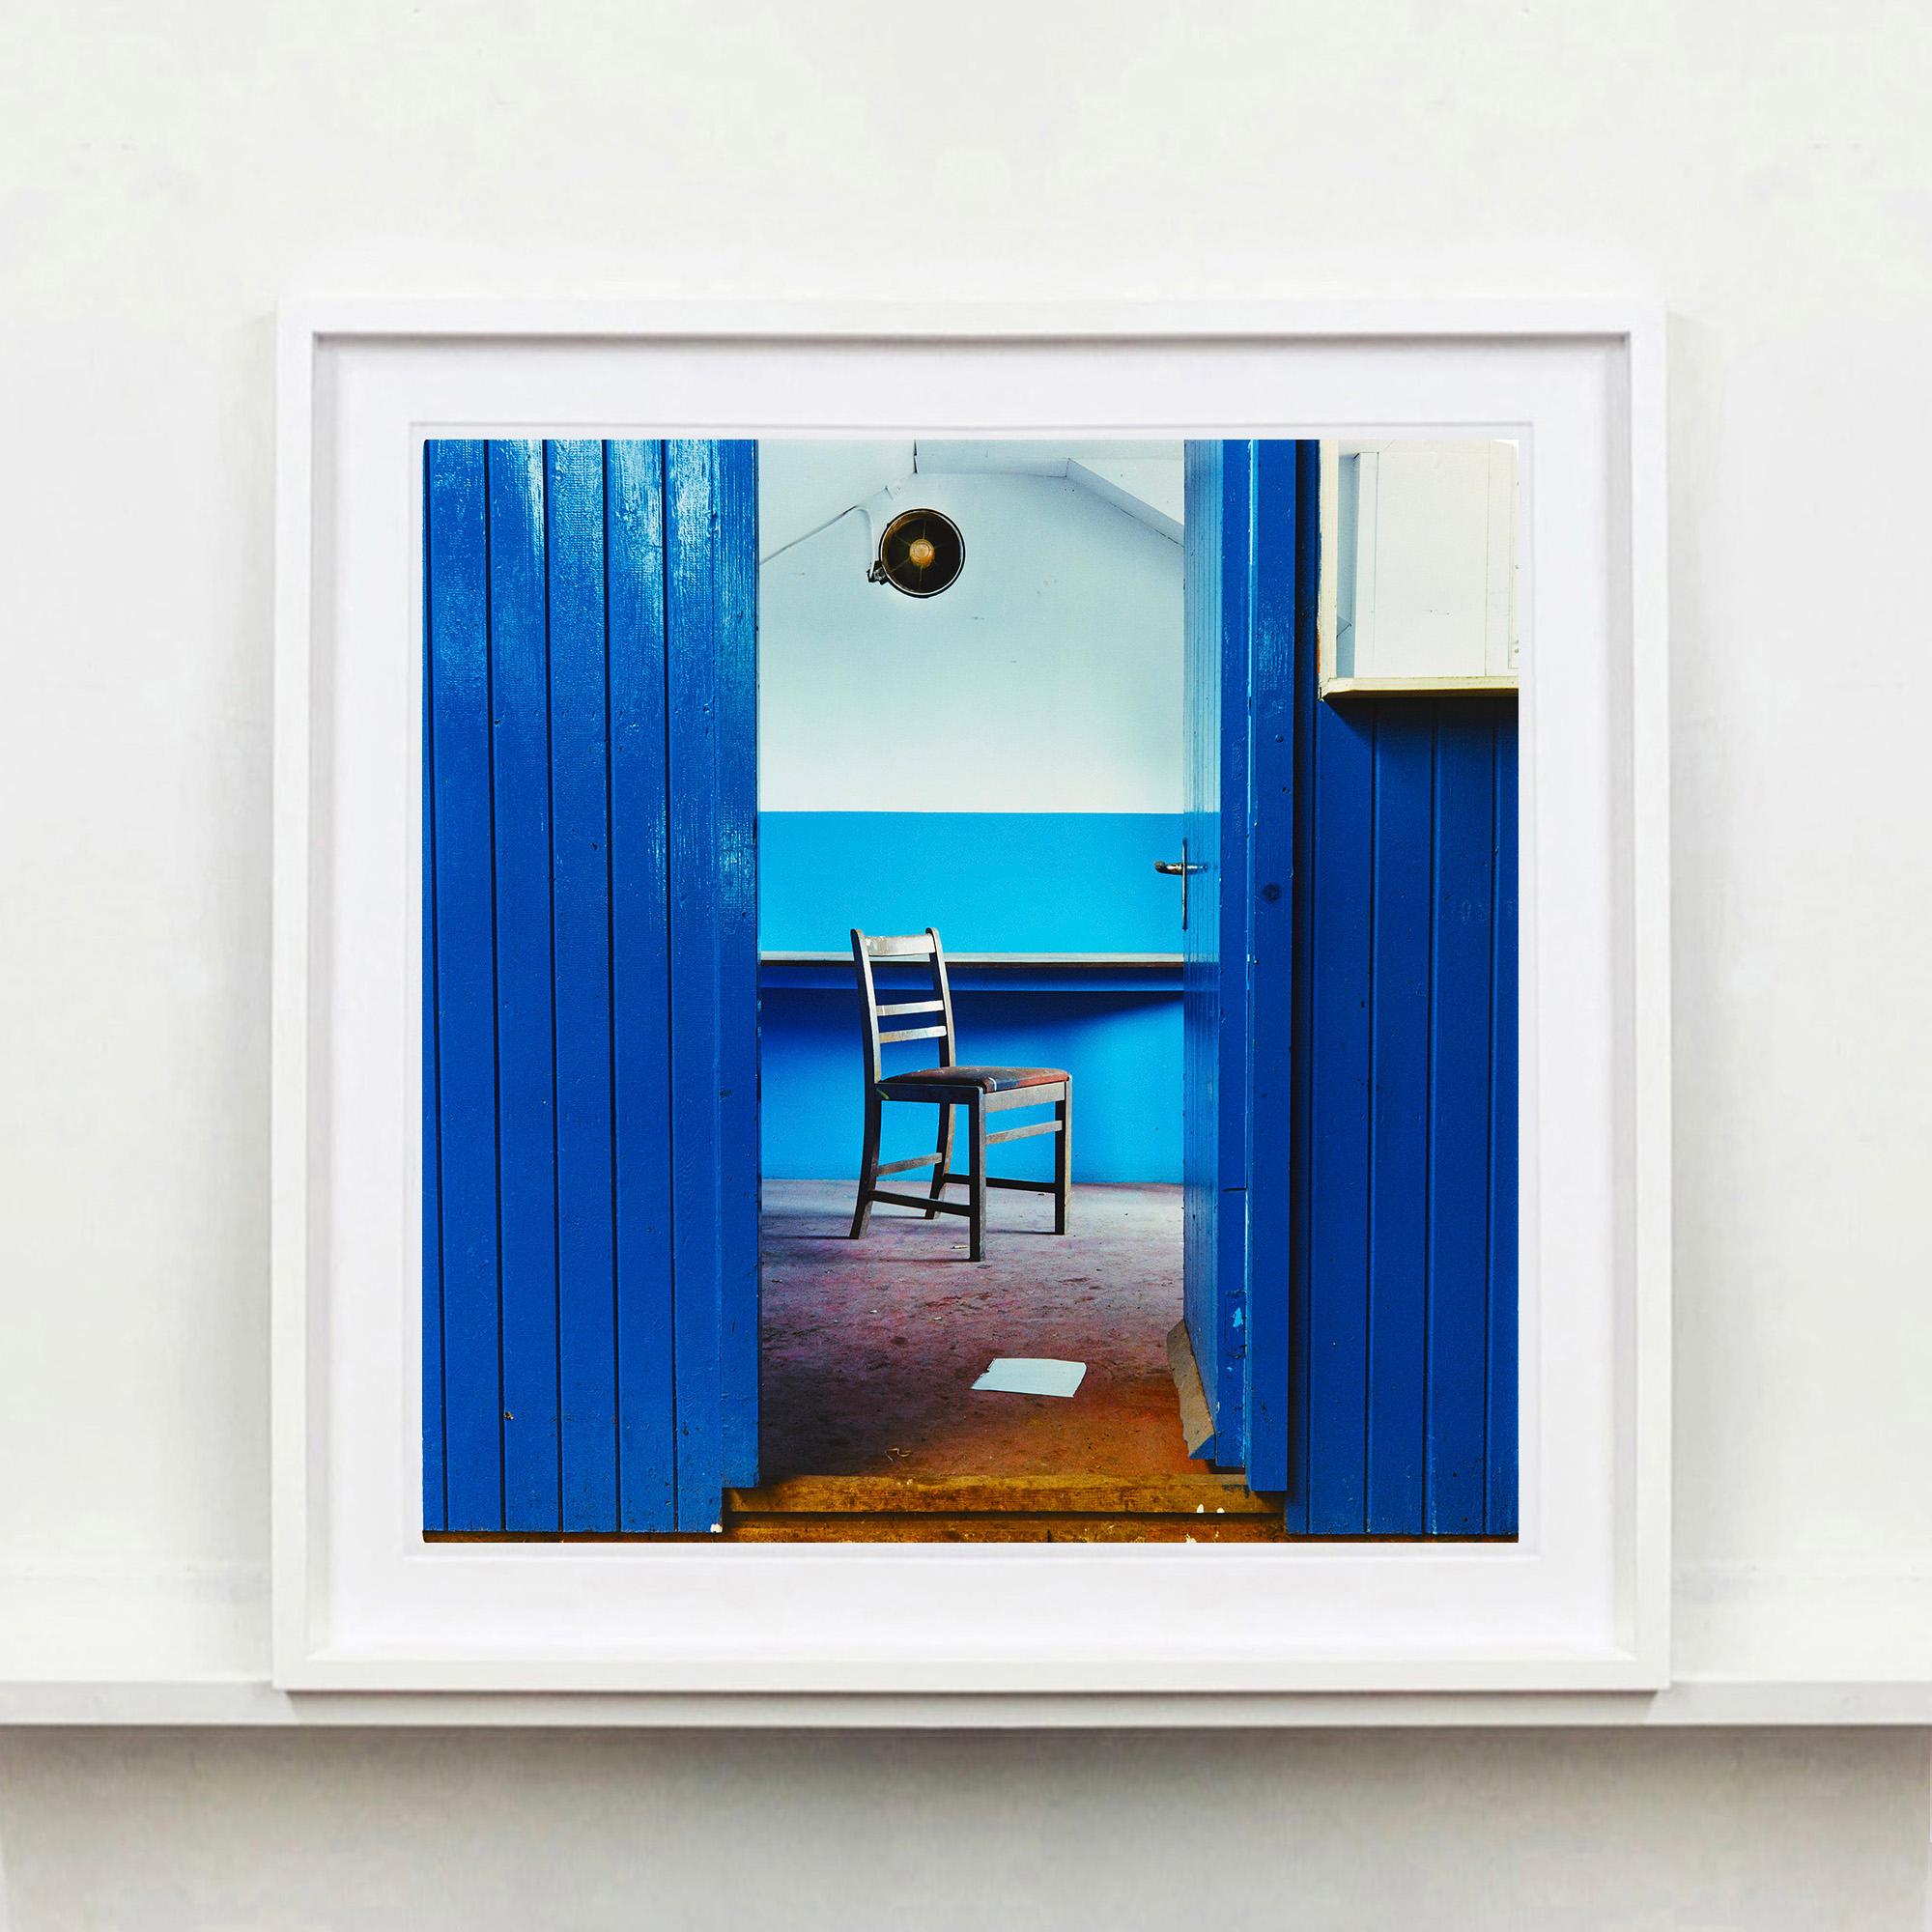 Chair, Northwich - Blue industrial interior photography - Contemporary Photograph by Richard Heeps